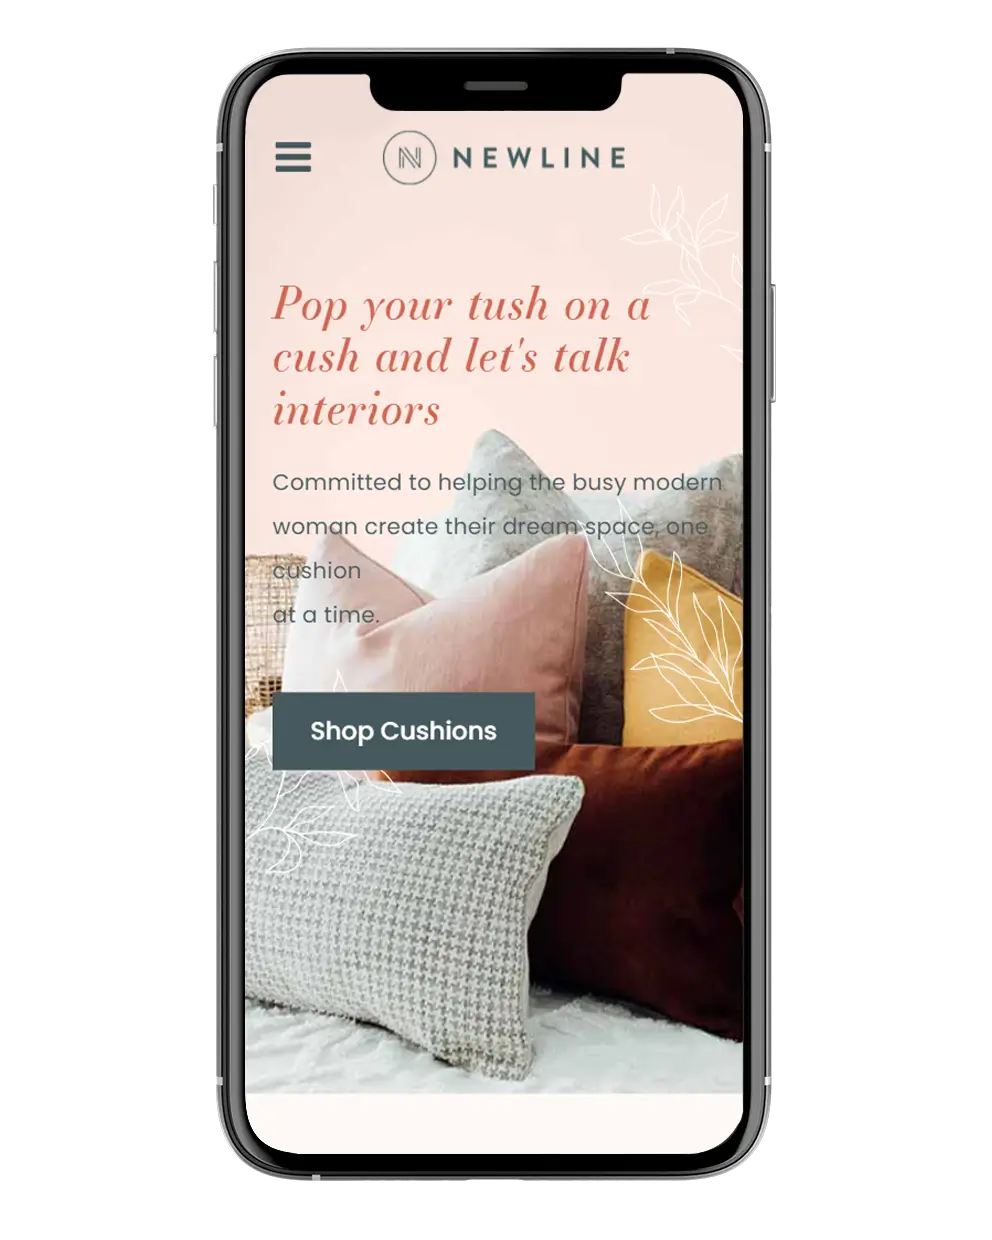 Mobile View Mockup of Newline eCommerce